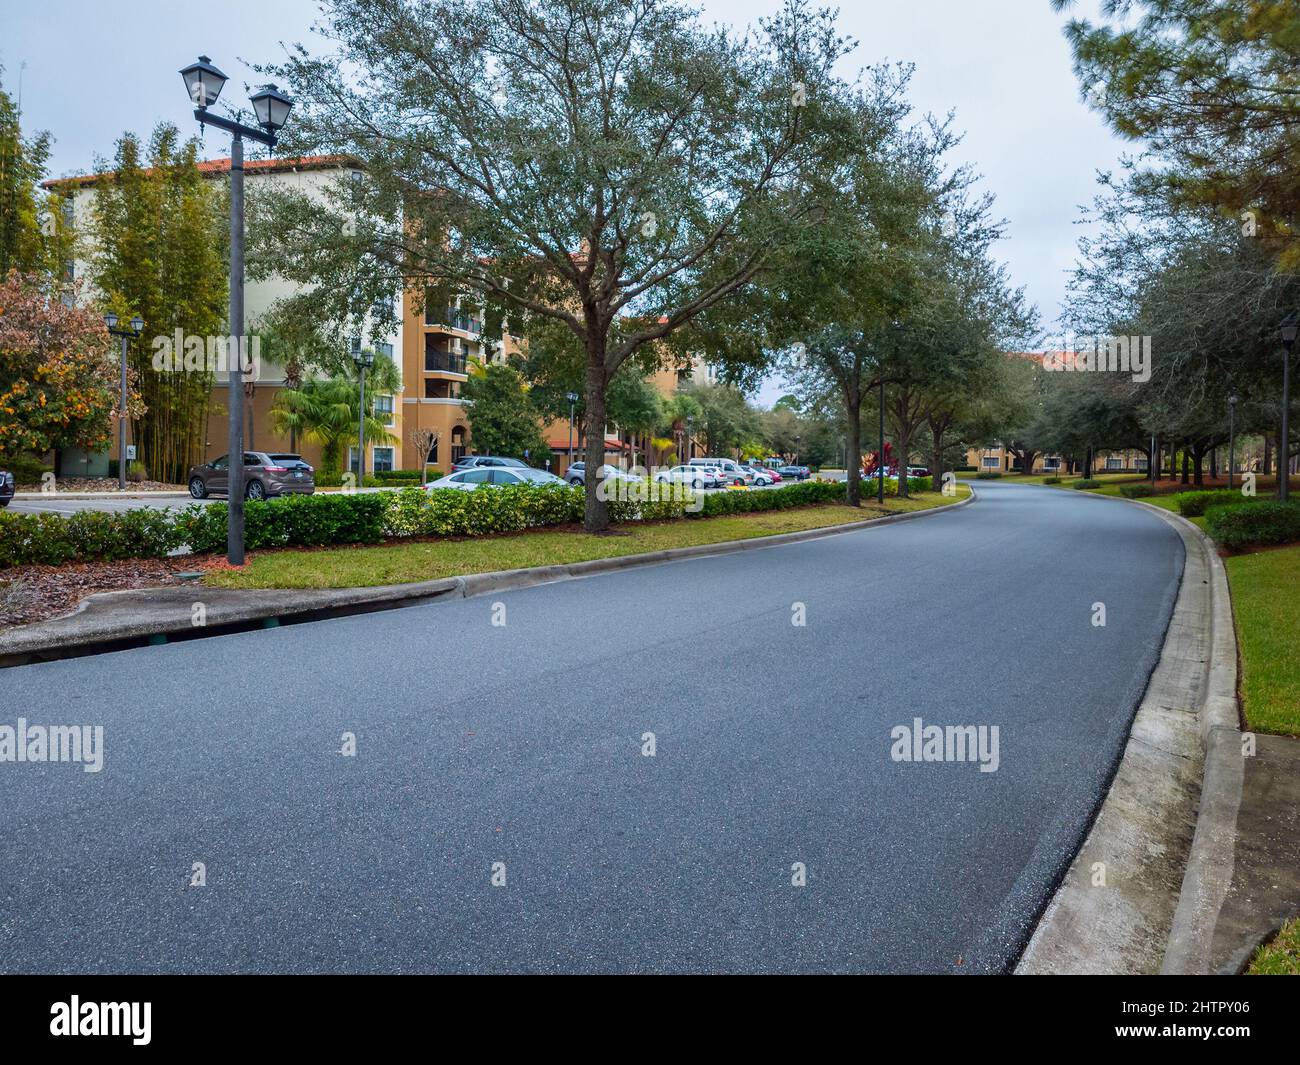 Kissimmee, Florida - February 6, 2022: Wide Street View of a Compound Building in Holiday Inn Resort. Stock Photo